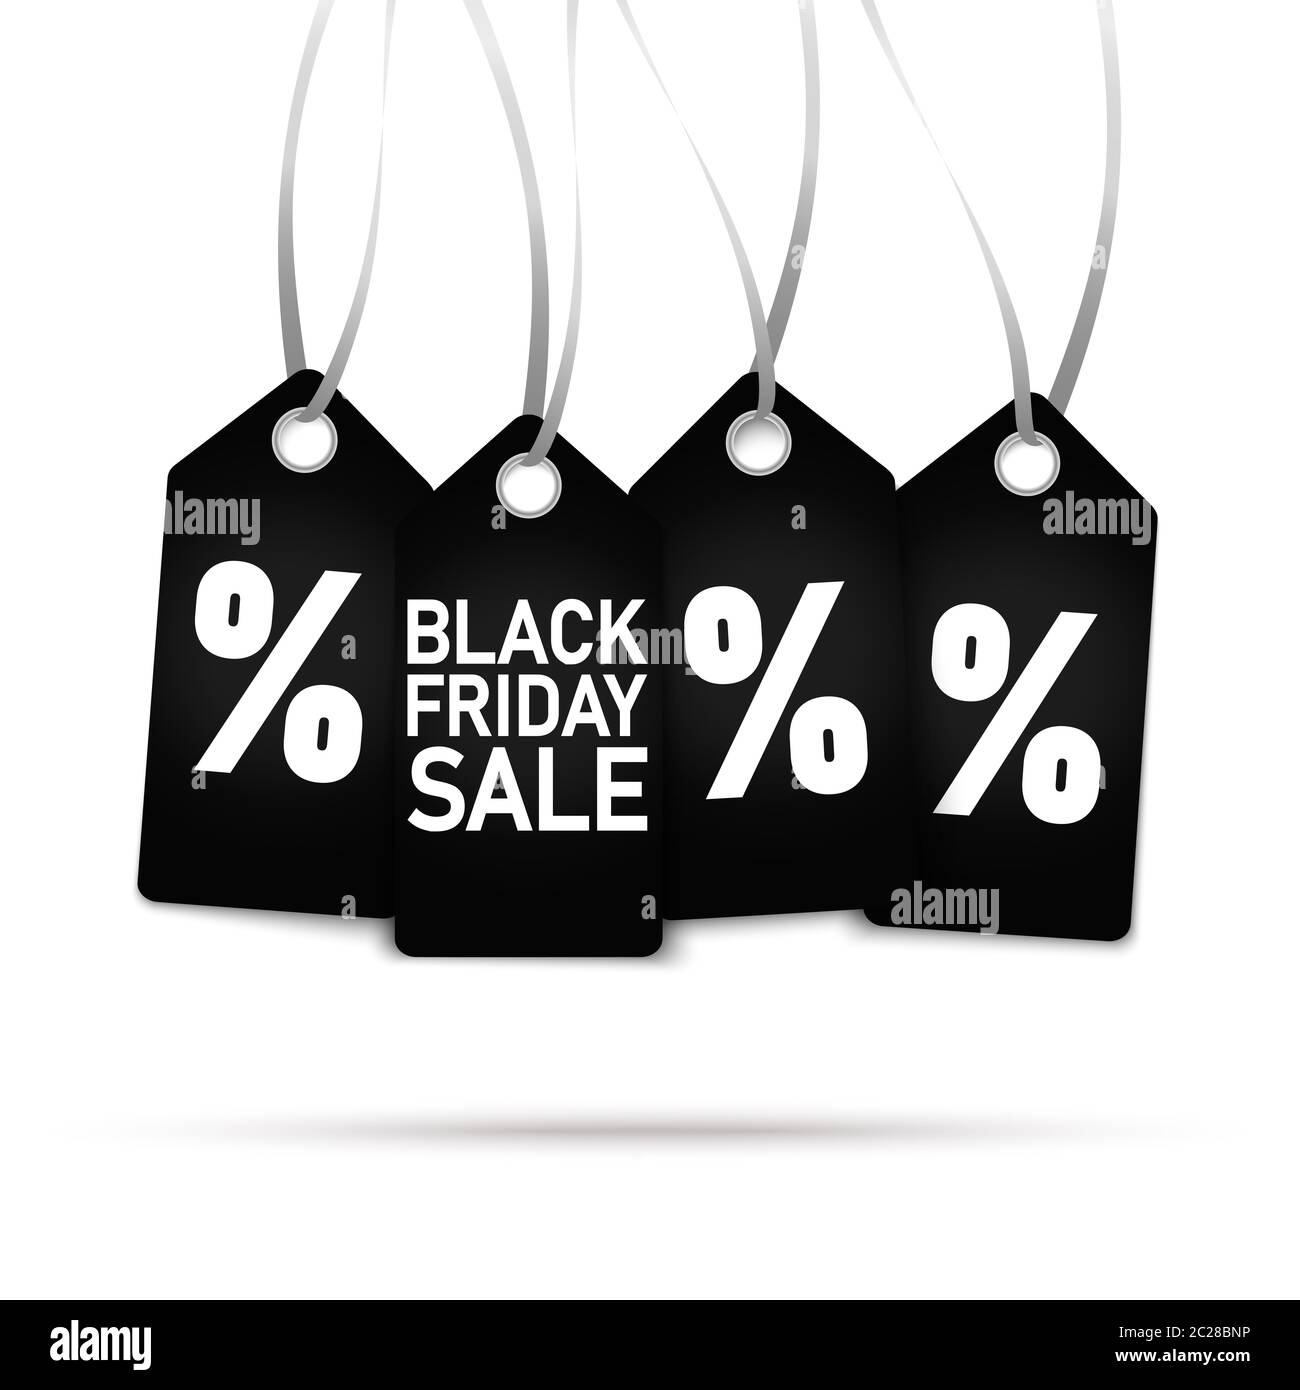 EPS 10 vector file illustration with hang tags with text BLACK FRIDAY SALE and percentage sign on white background Stock Photo